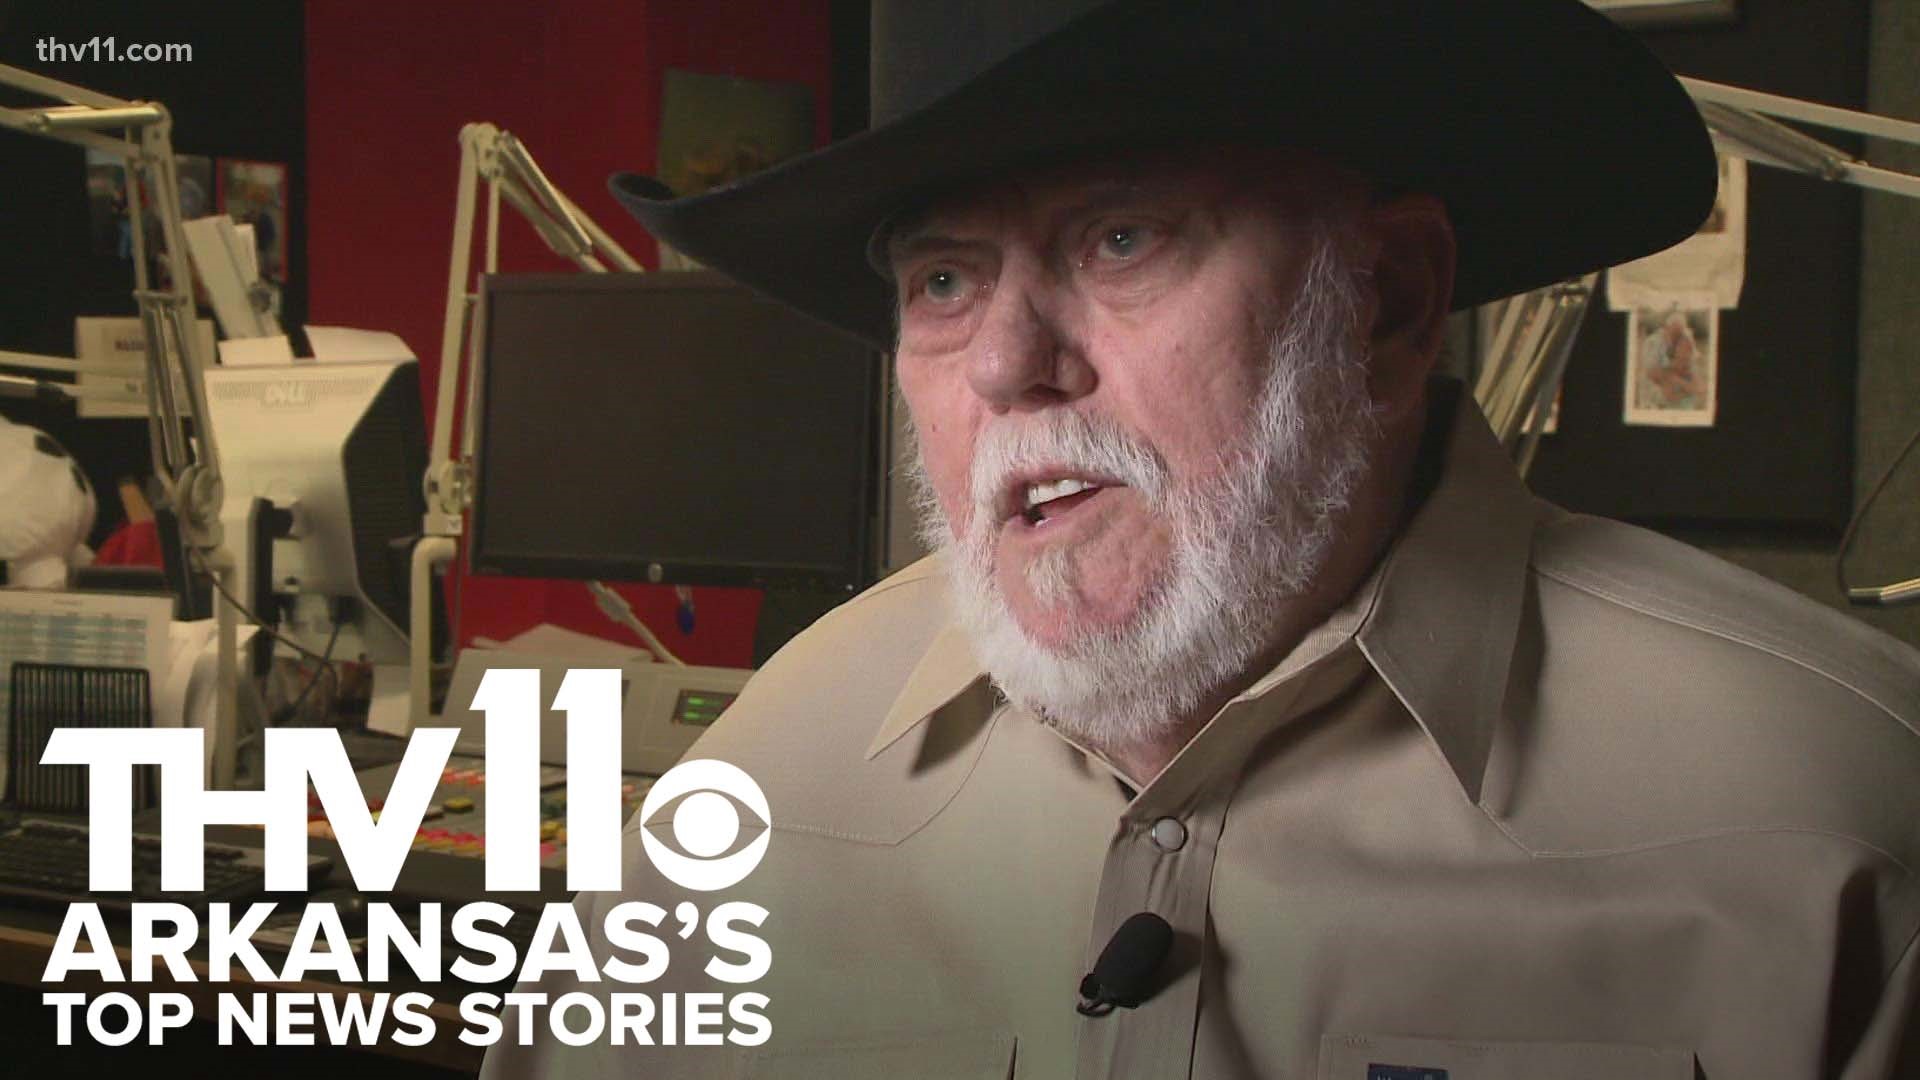 Sarah Horbacewicz provides the top news stories in Arkansas including the death of Arkansas radio legend Bob Robbins and severe weather in the state.